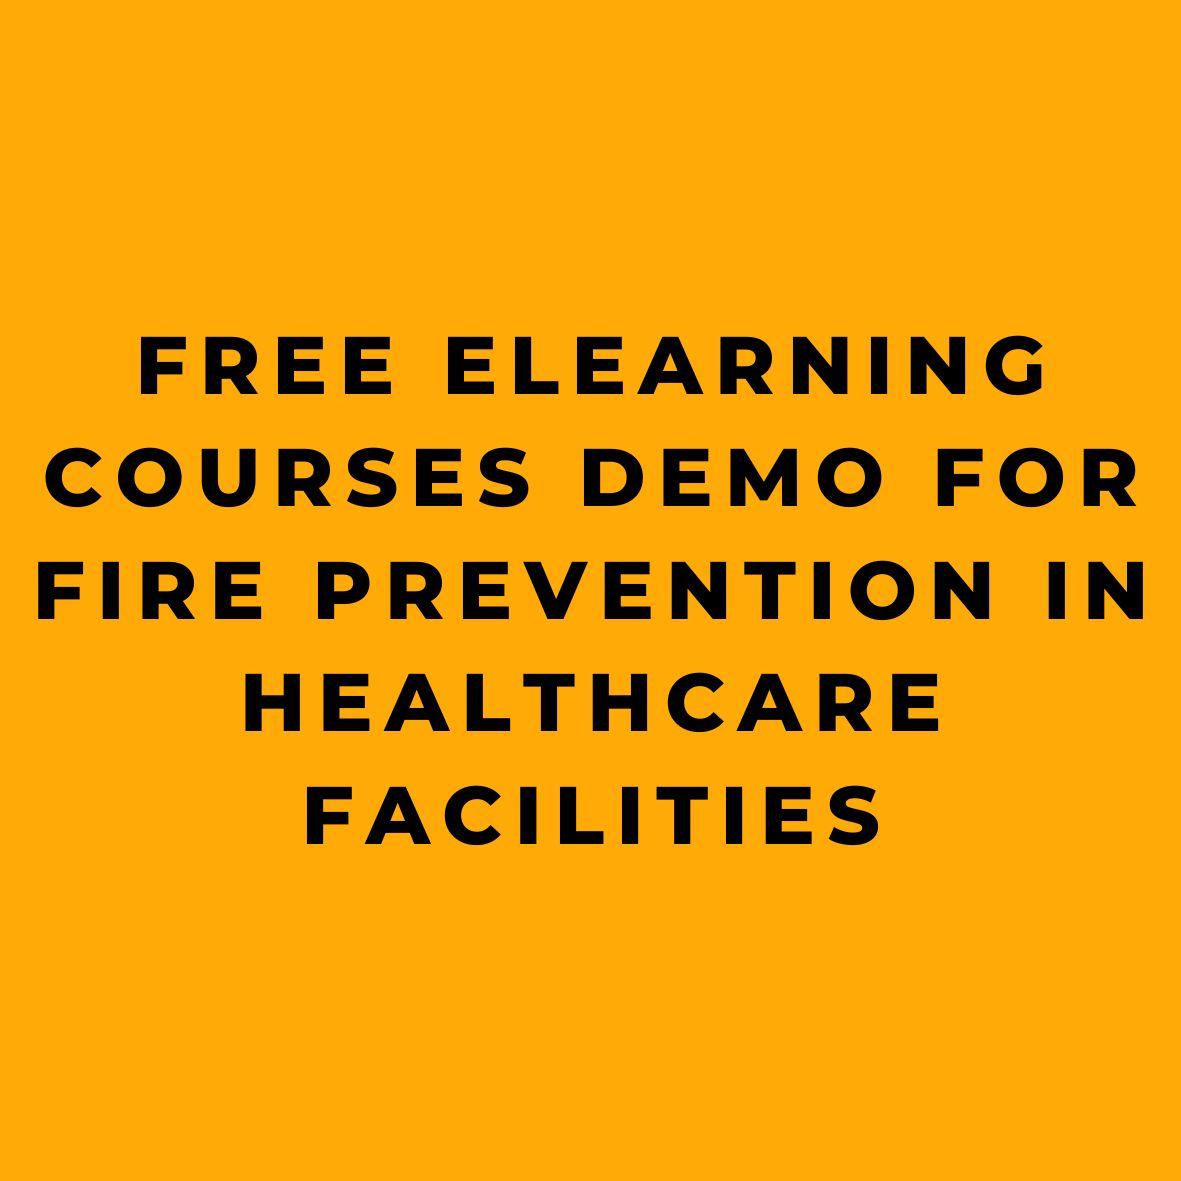 Free eLearning Courses Demo for Fire Prevention in Healthcare Facilities